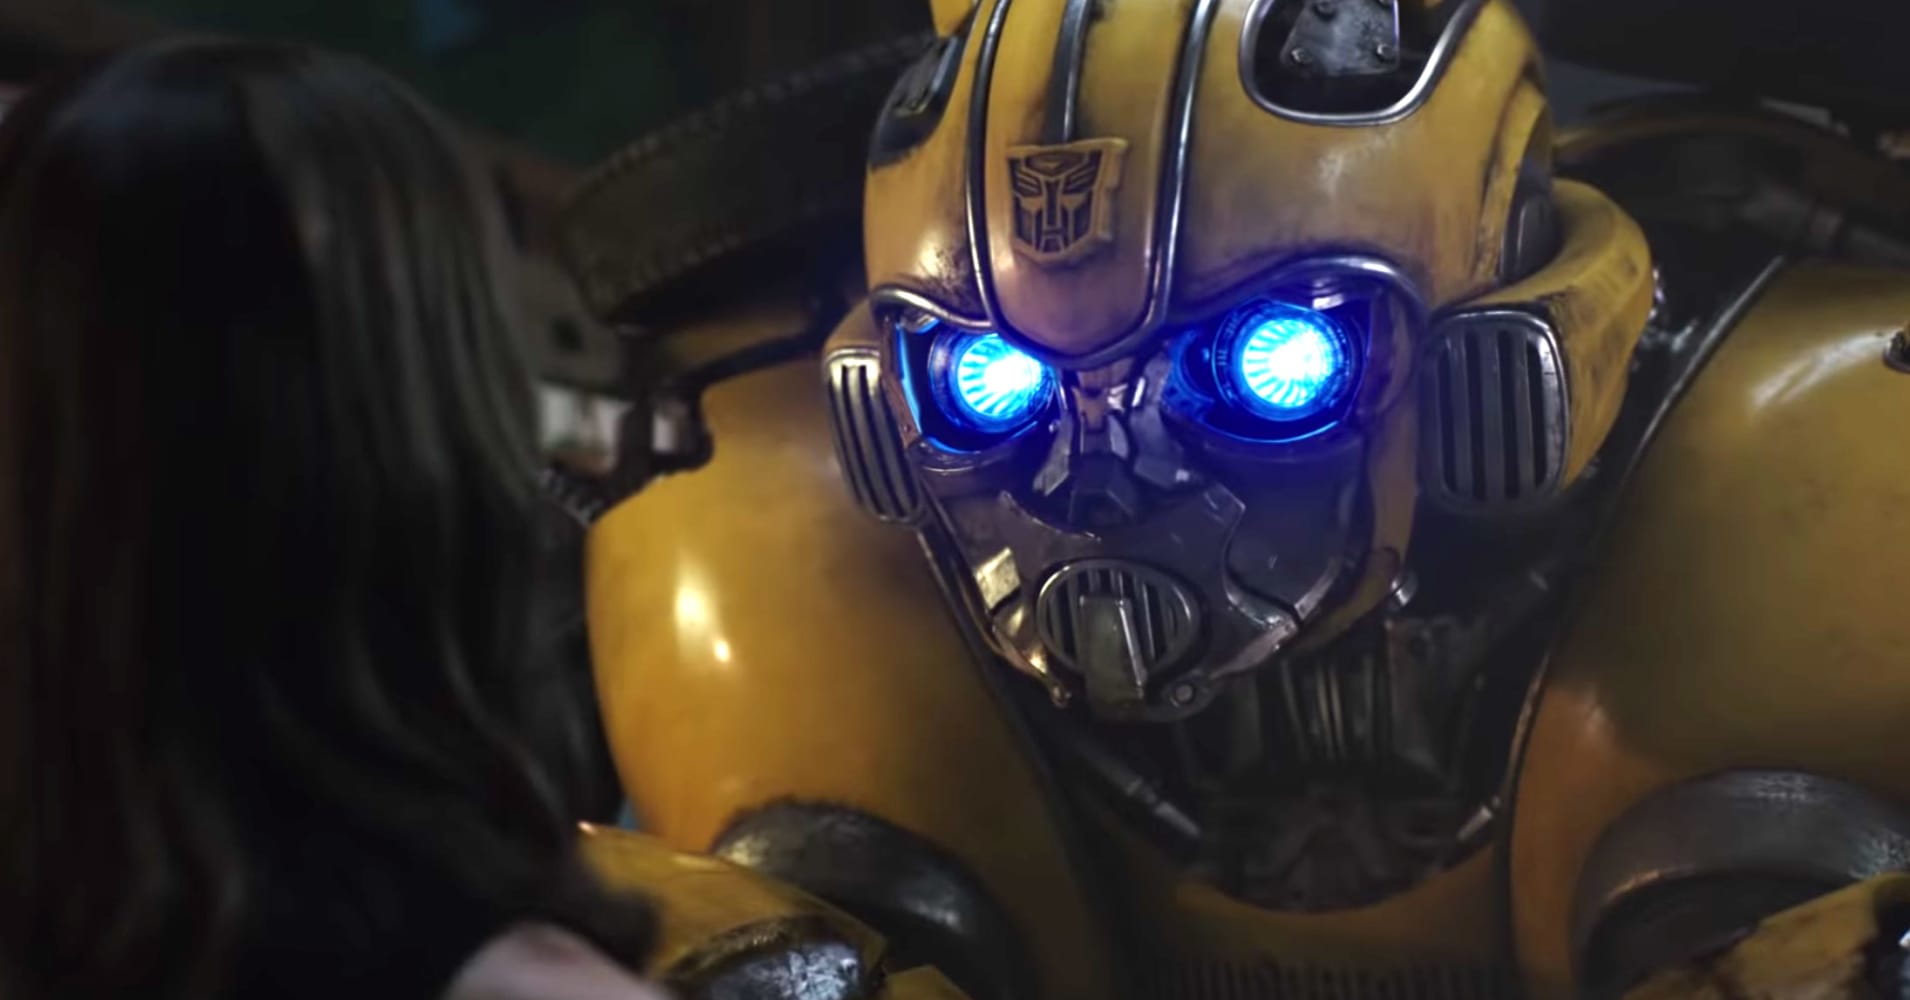 'Bumblebee' will test whether 'burned out' fans will come back to the 'Transformers' franchise